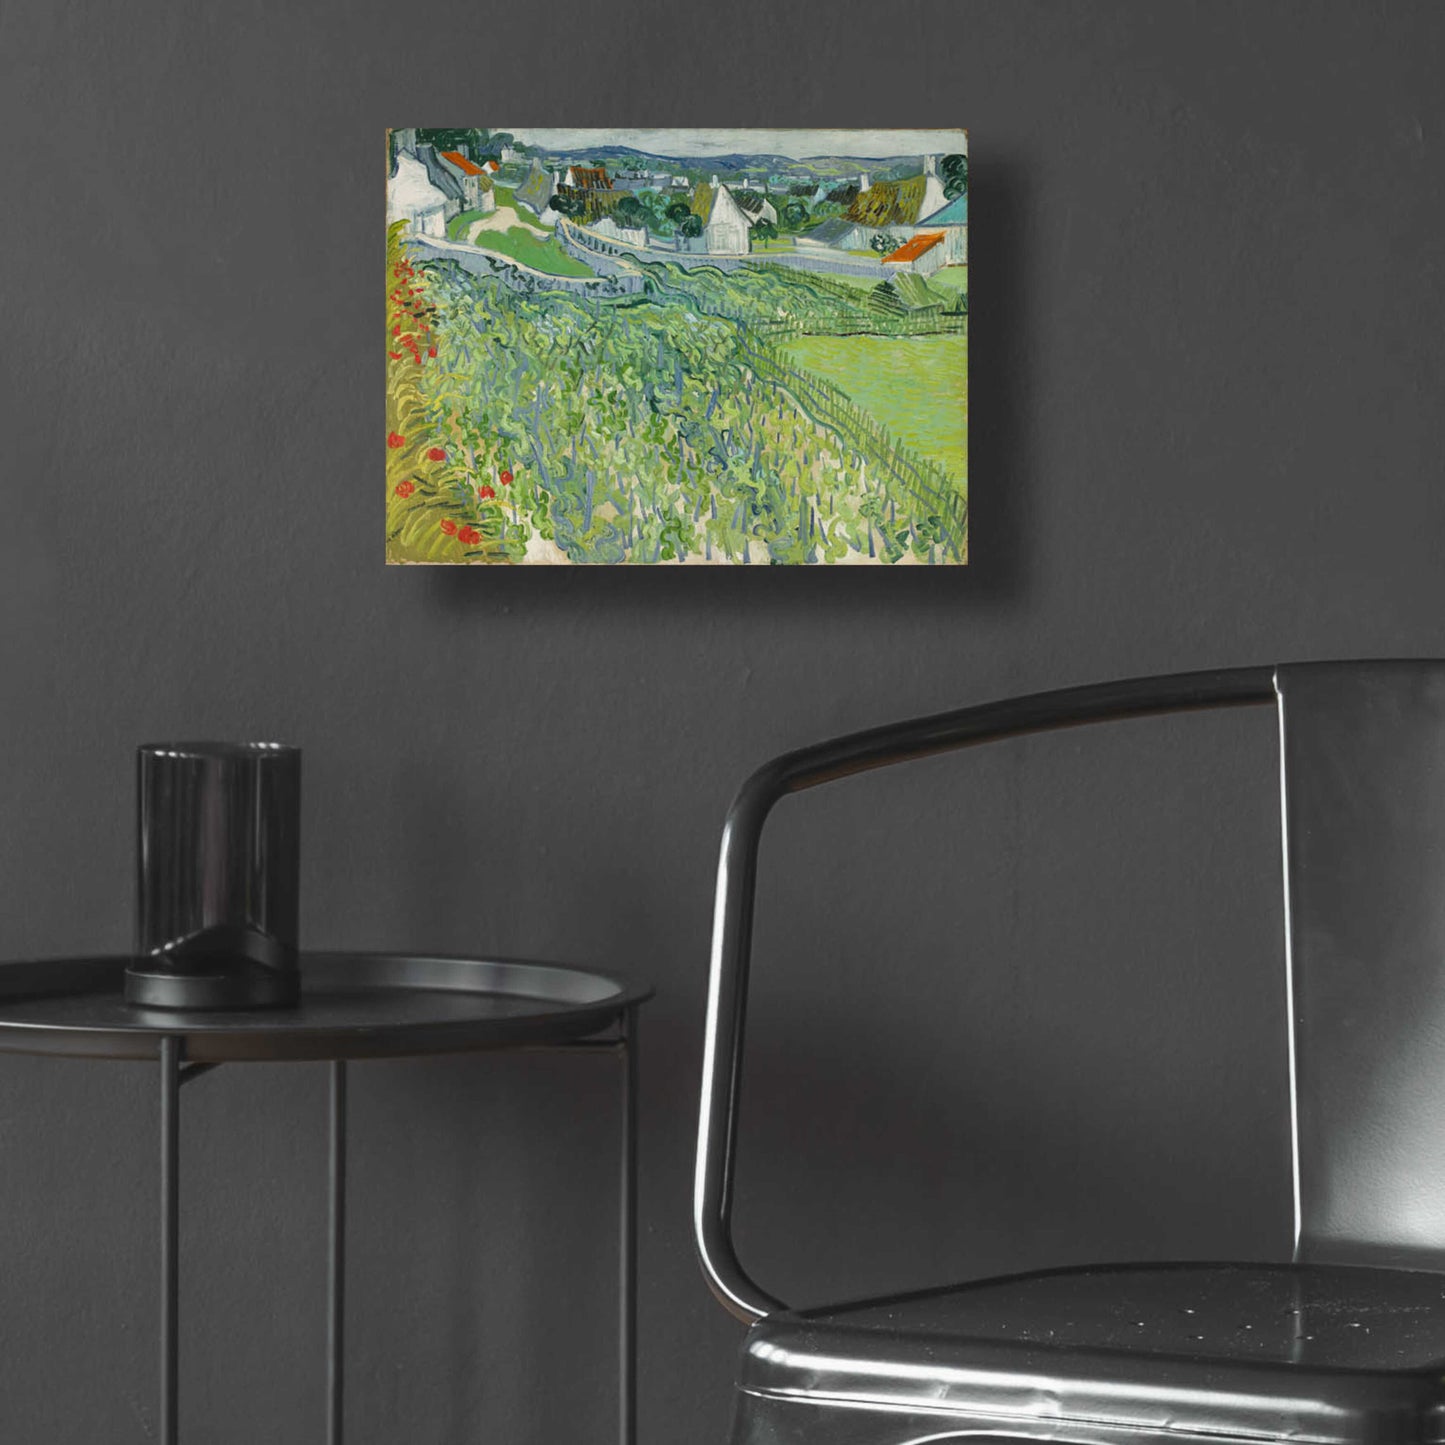 Epic Art 'Vineyards At Auvers' by Vincent Van Gogh, Acrylic Glass Wall Art,16x12